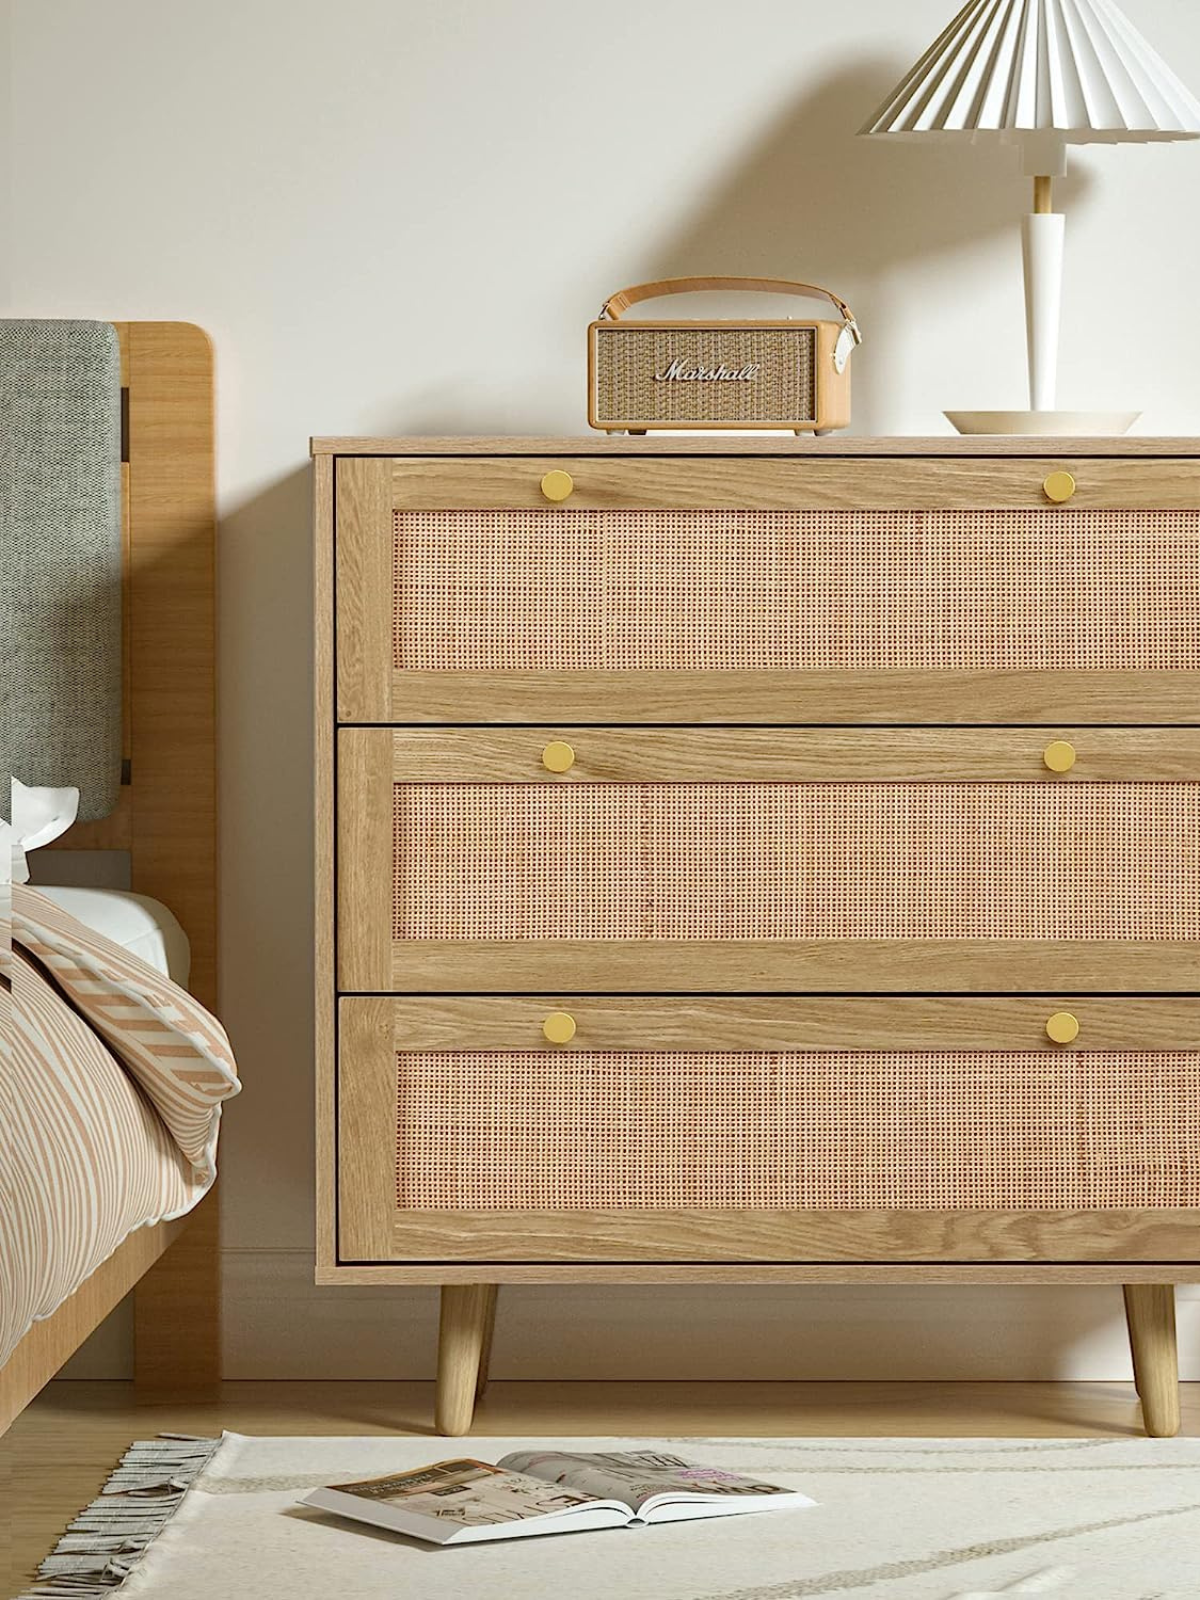 Rattan Dresser for Bedroom, Modern Wood 3 Drawer Dresser Chest of Drawer with Rattan Doors Large Storage Space